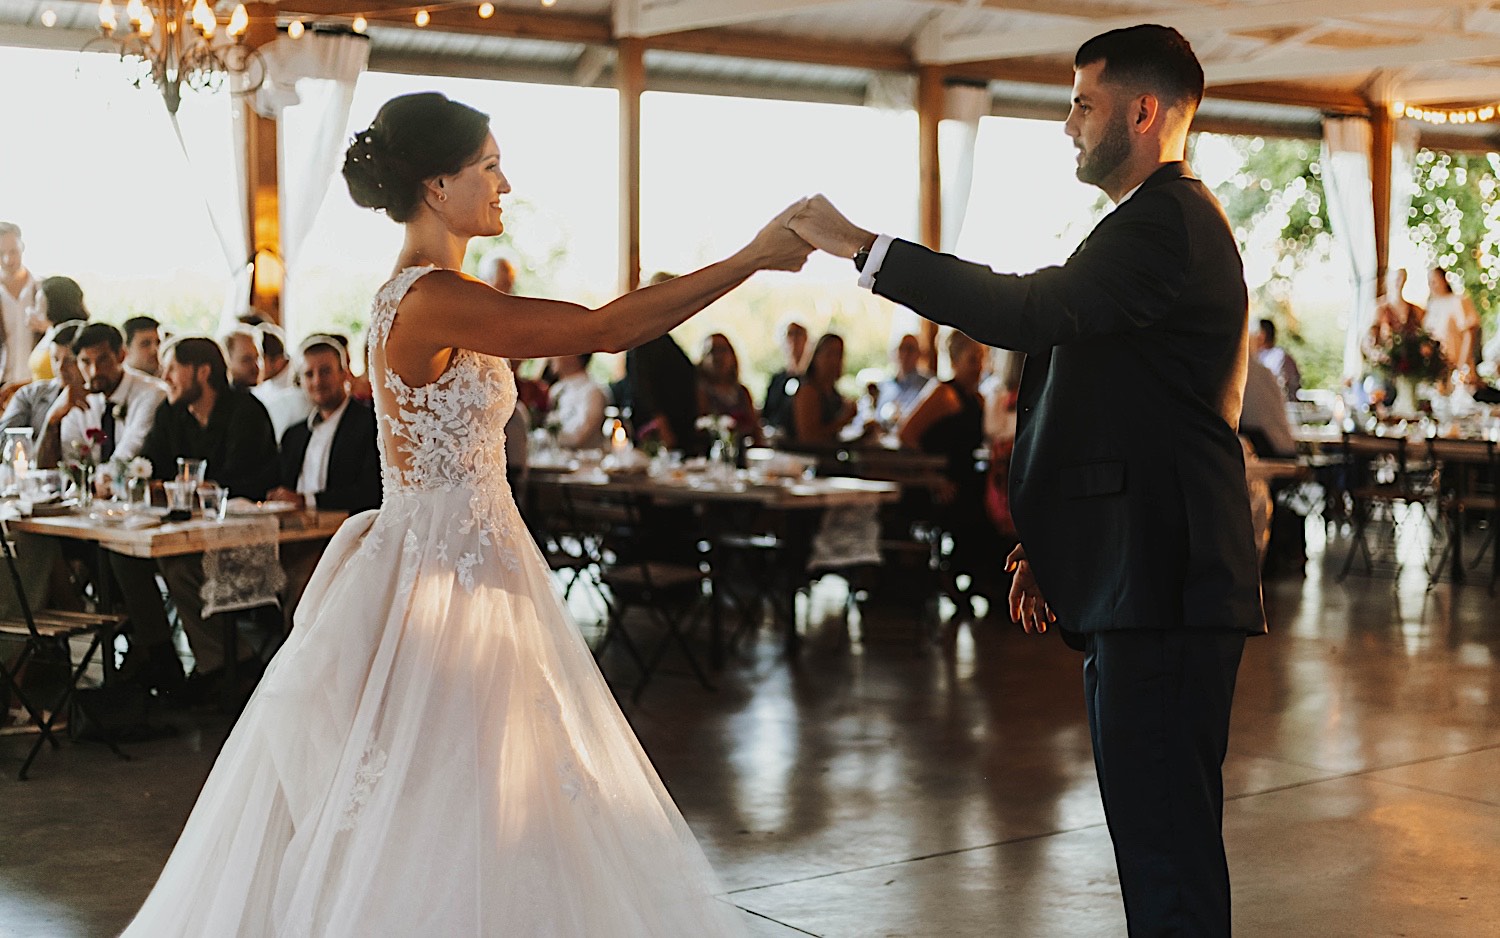 A bride and groom dance with one another while guests watch during their wedding reception at their venue Legacy Hill Farms in Minnesota